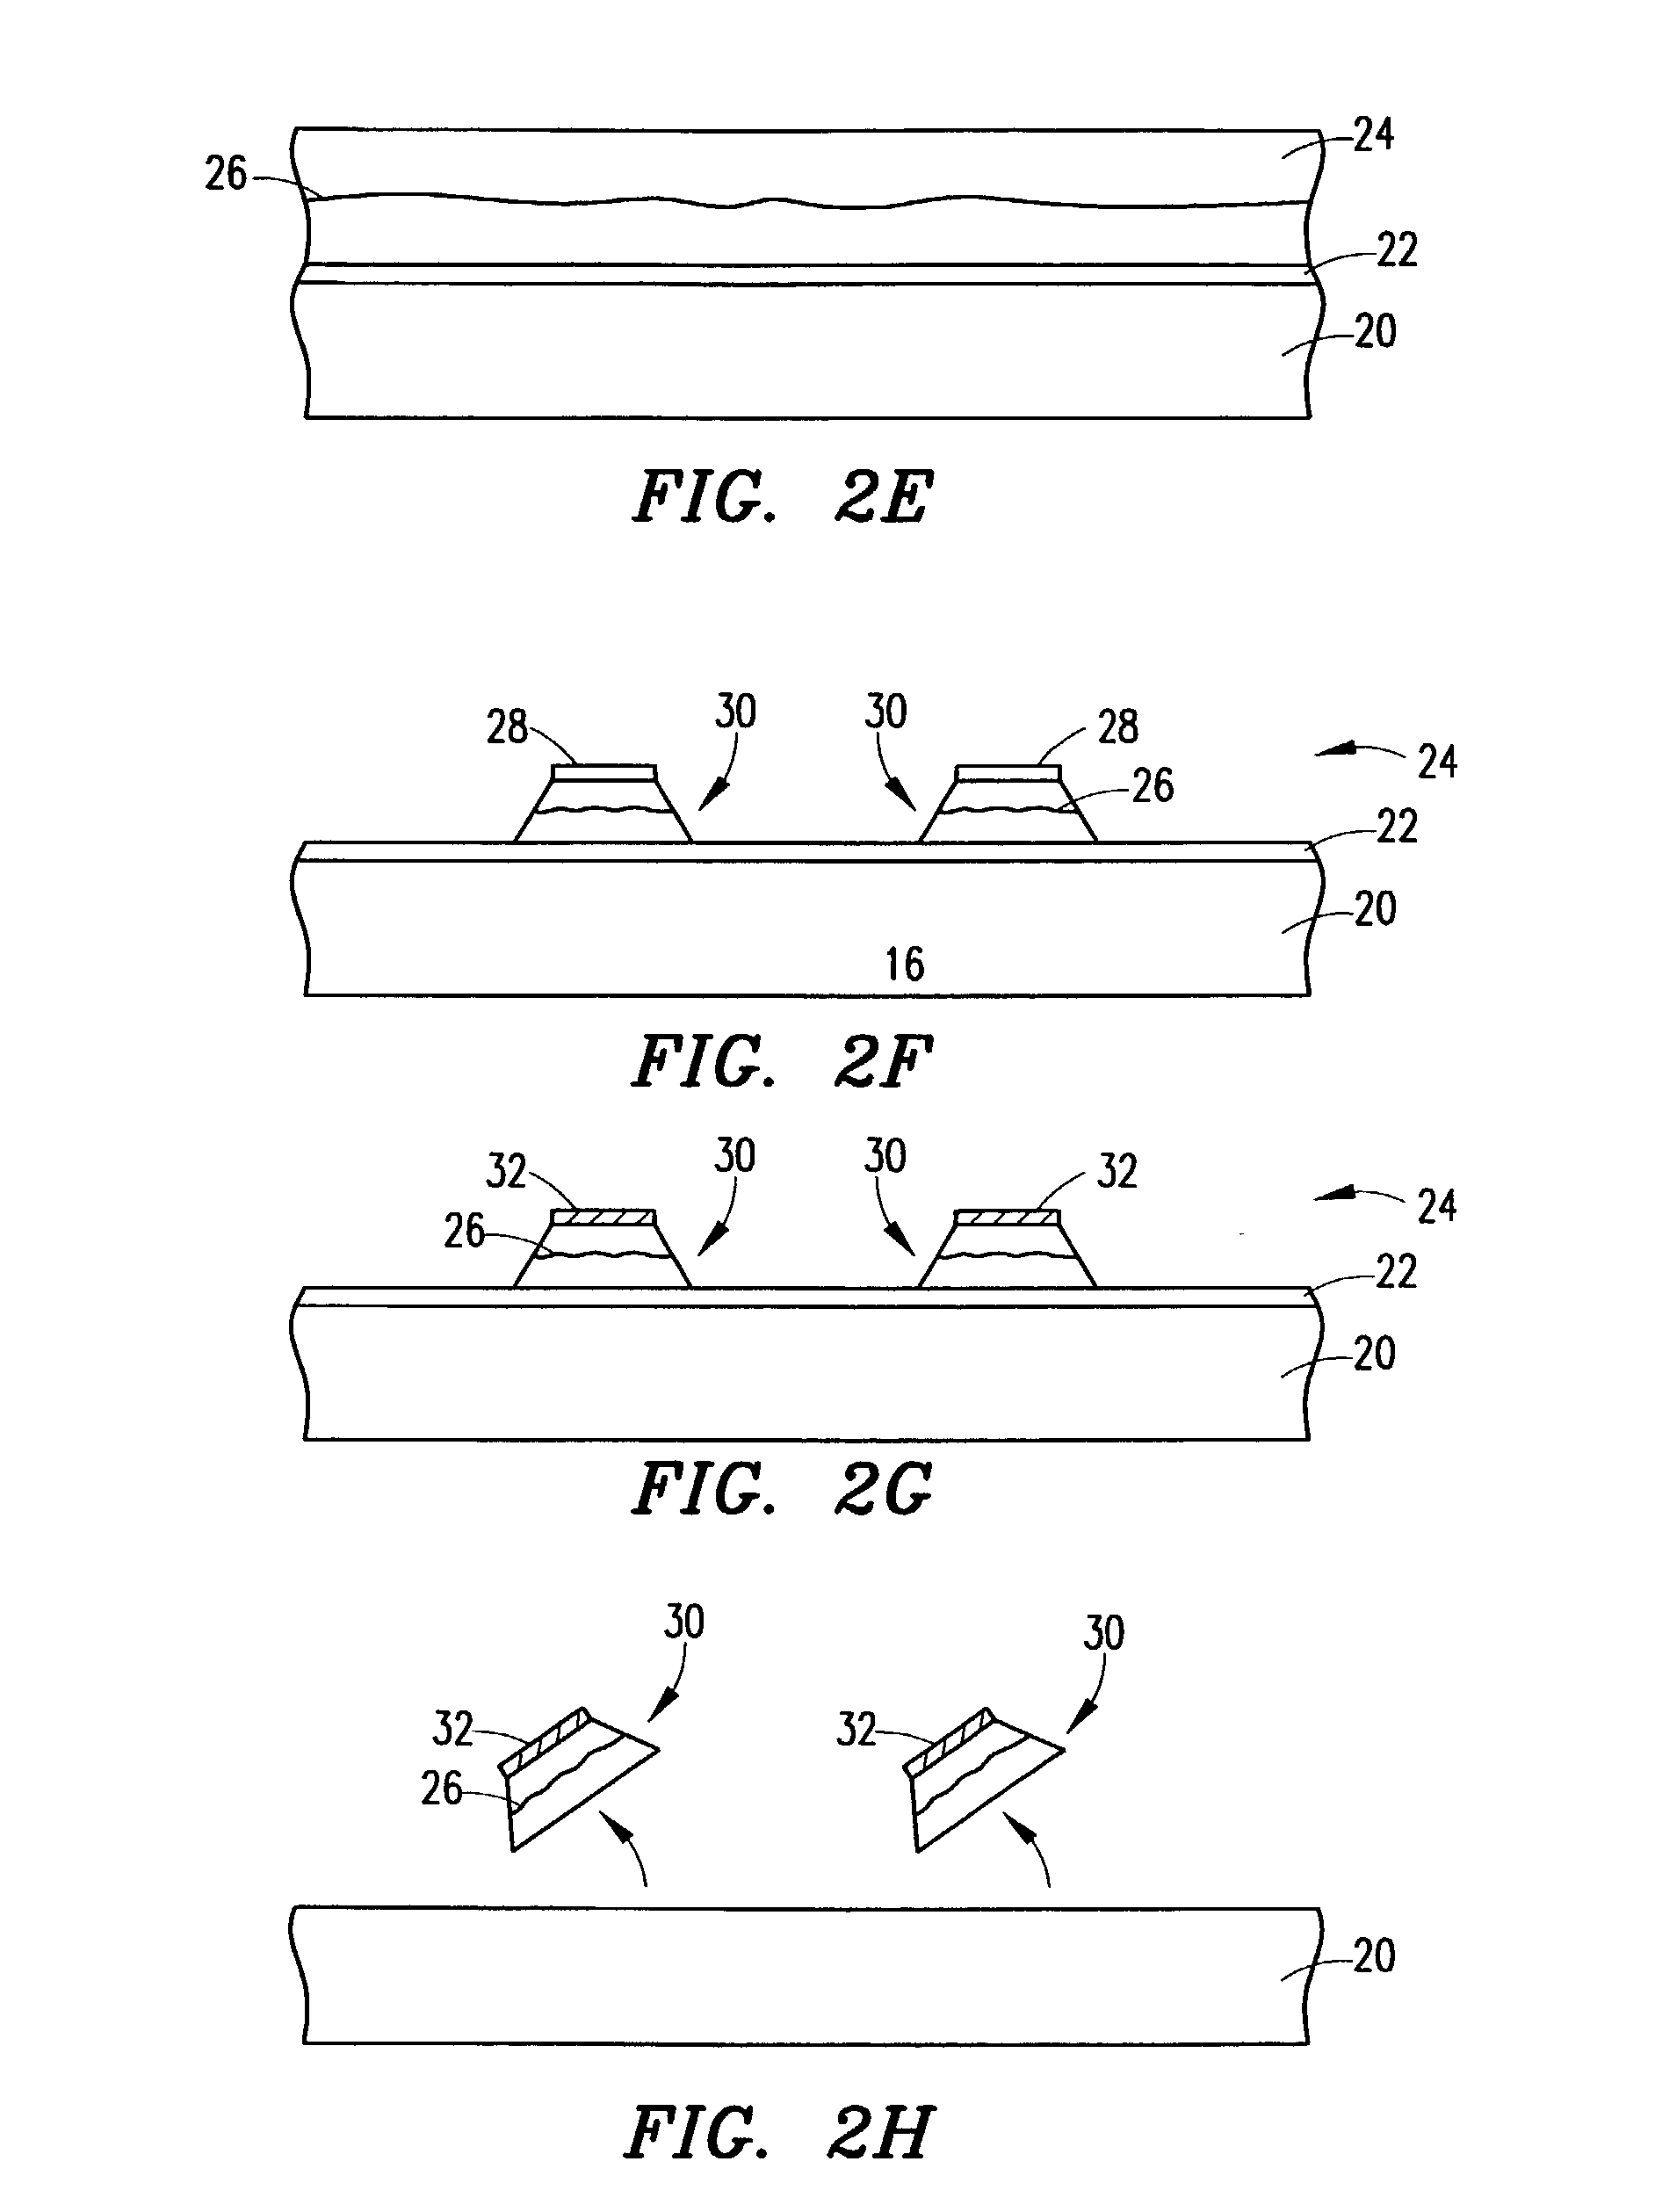 Optical excitation/detection device and method for making same using fluidic self-assembly techniques